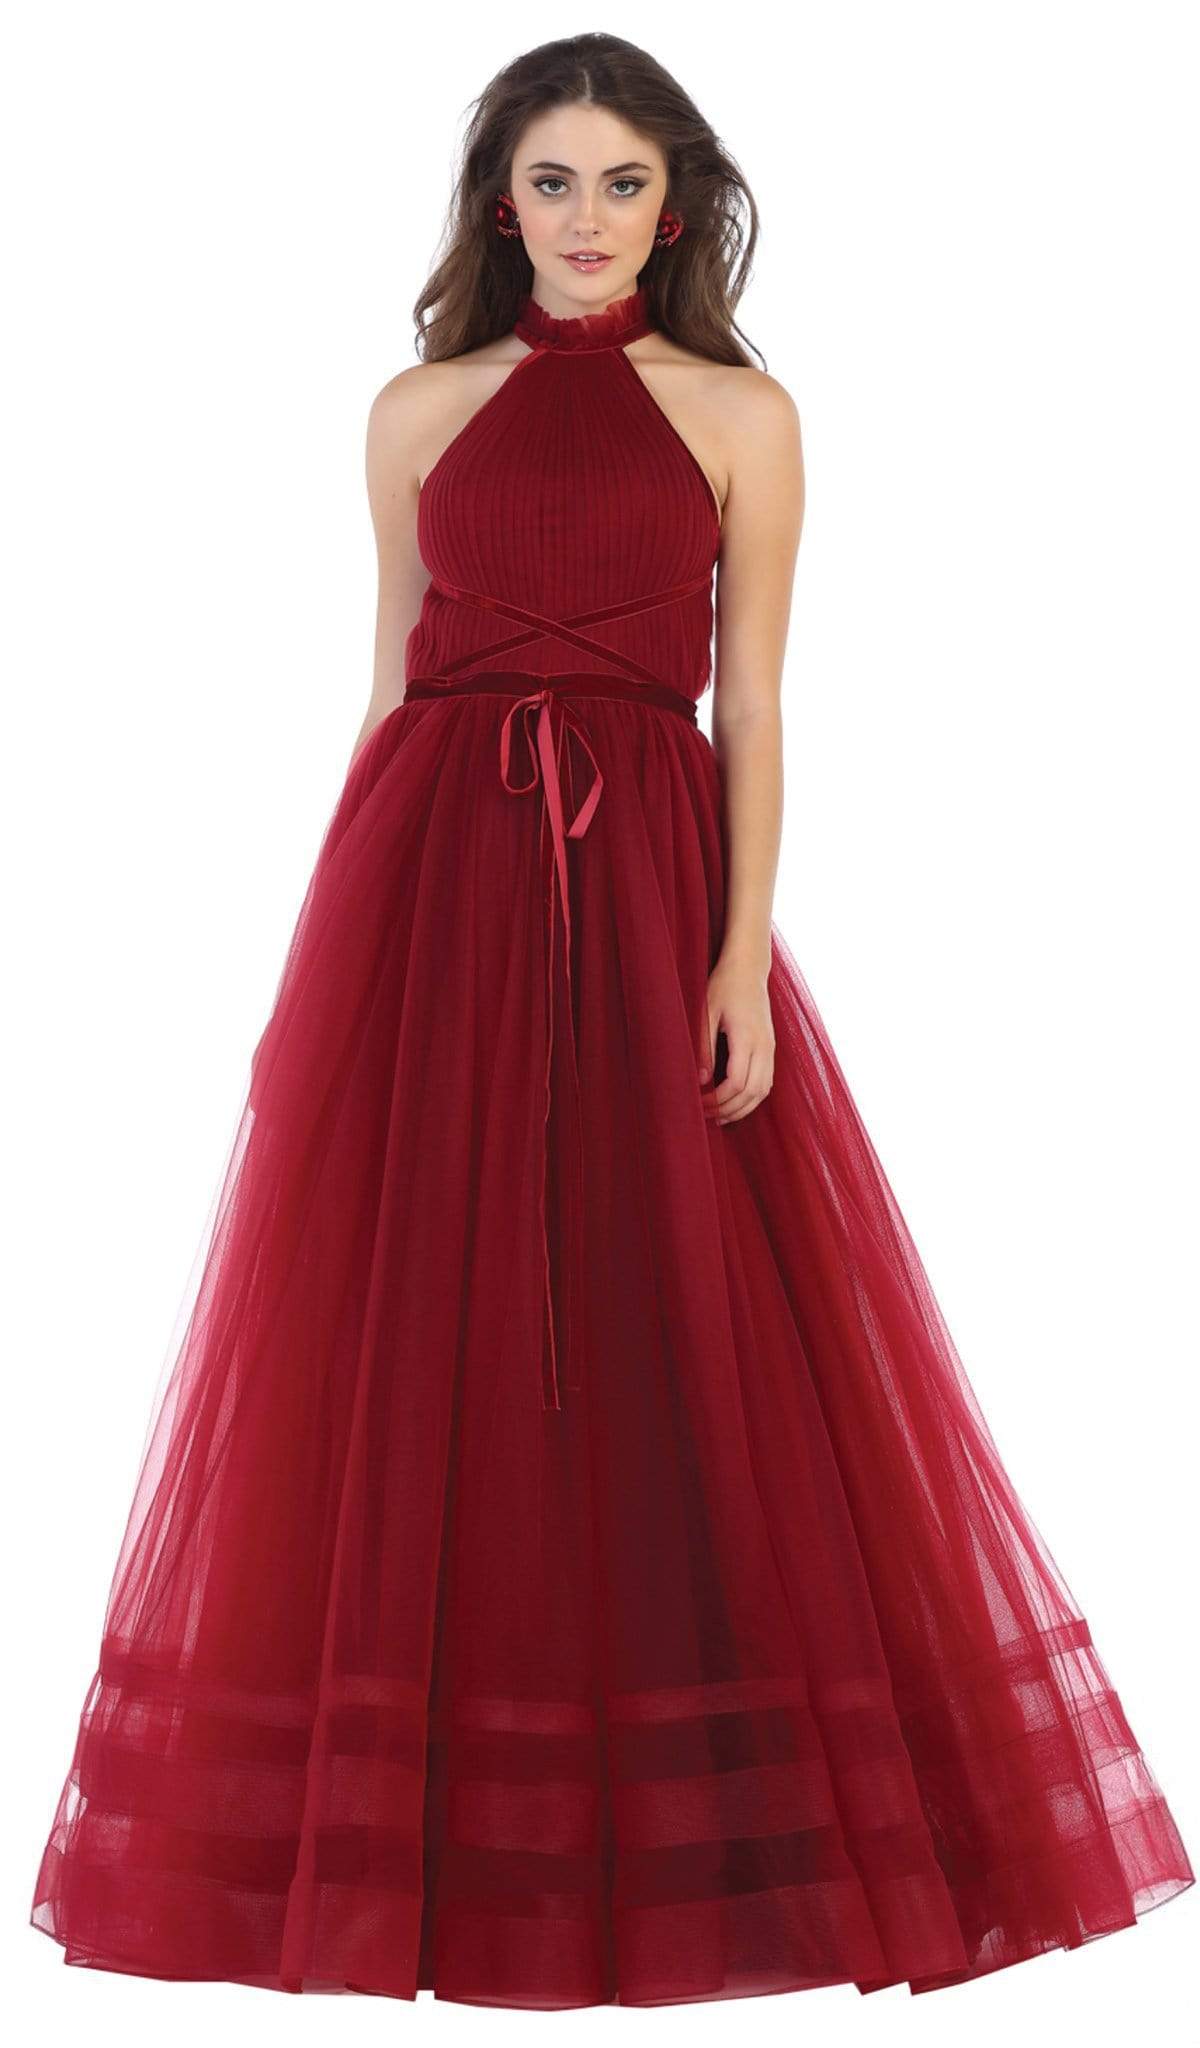 May Queen - RQ7669 High Neck Pleated A-Line Evening Gown